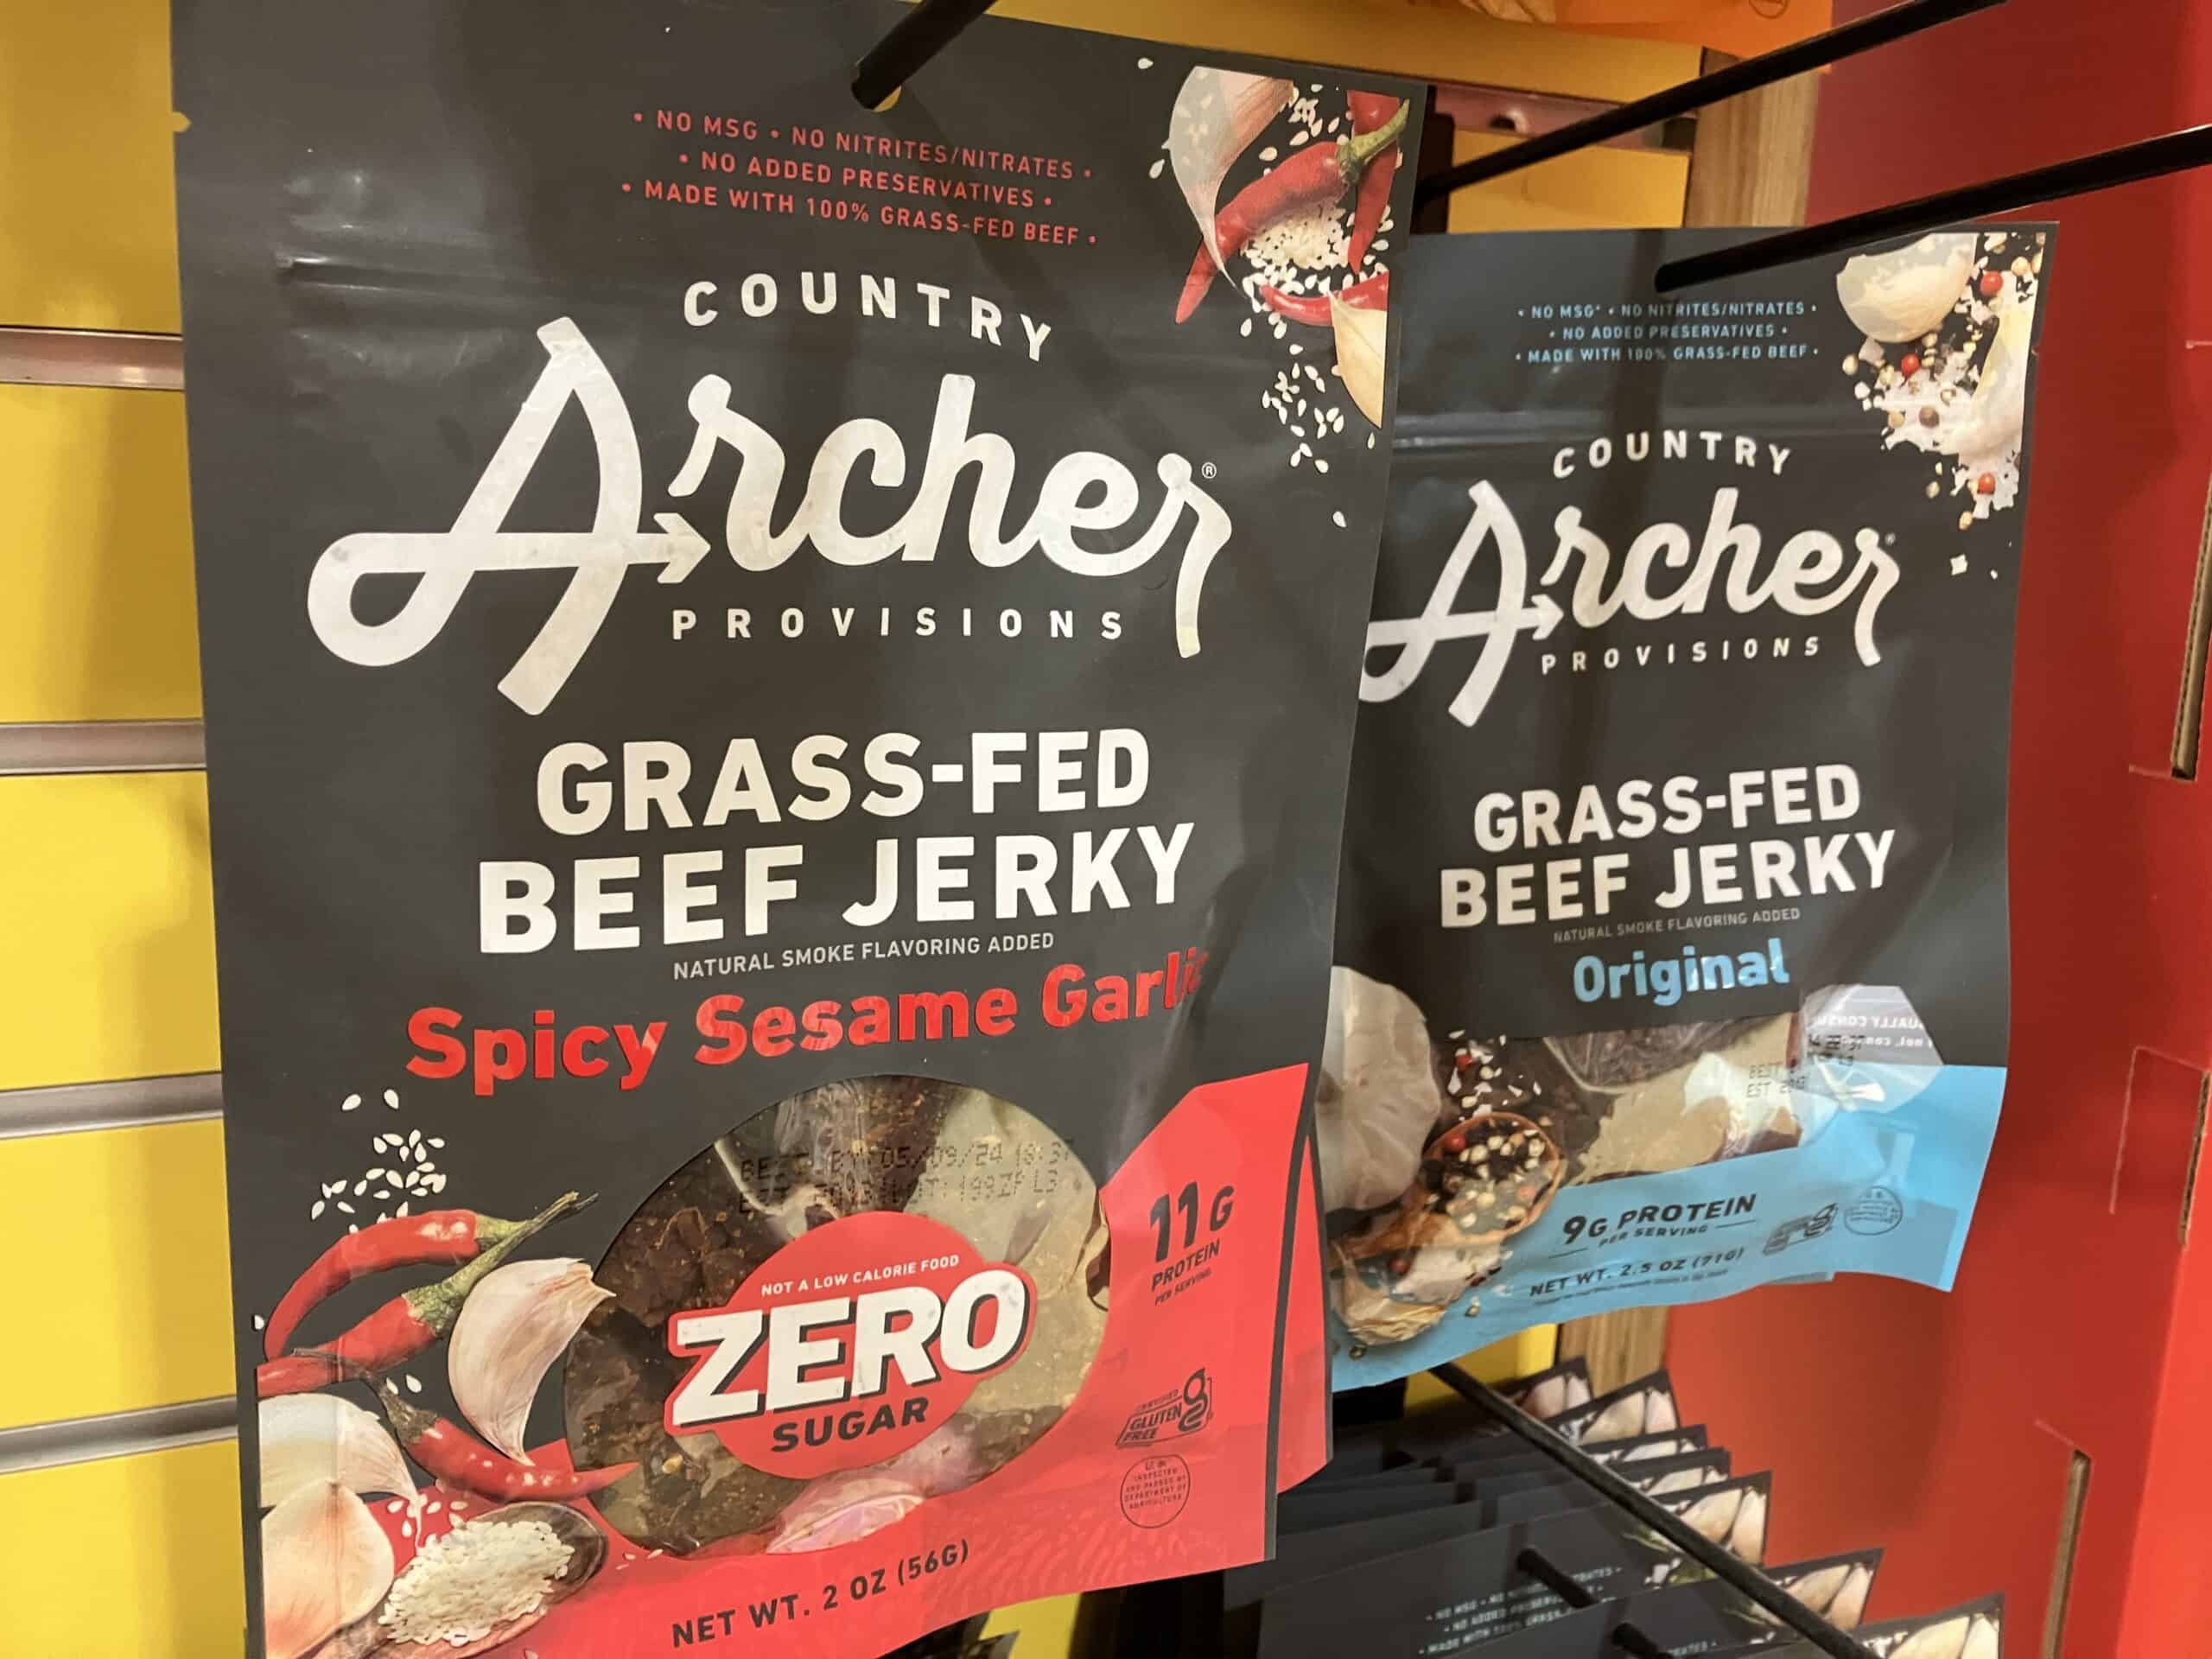 Country Archer beef jerky